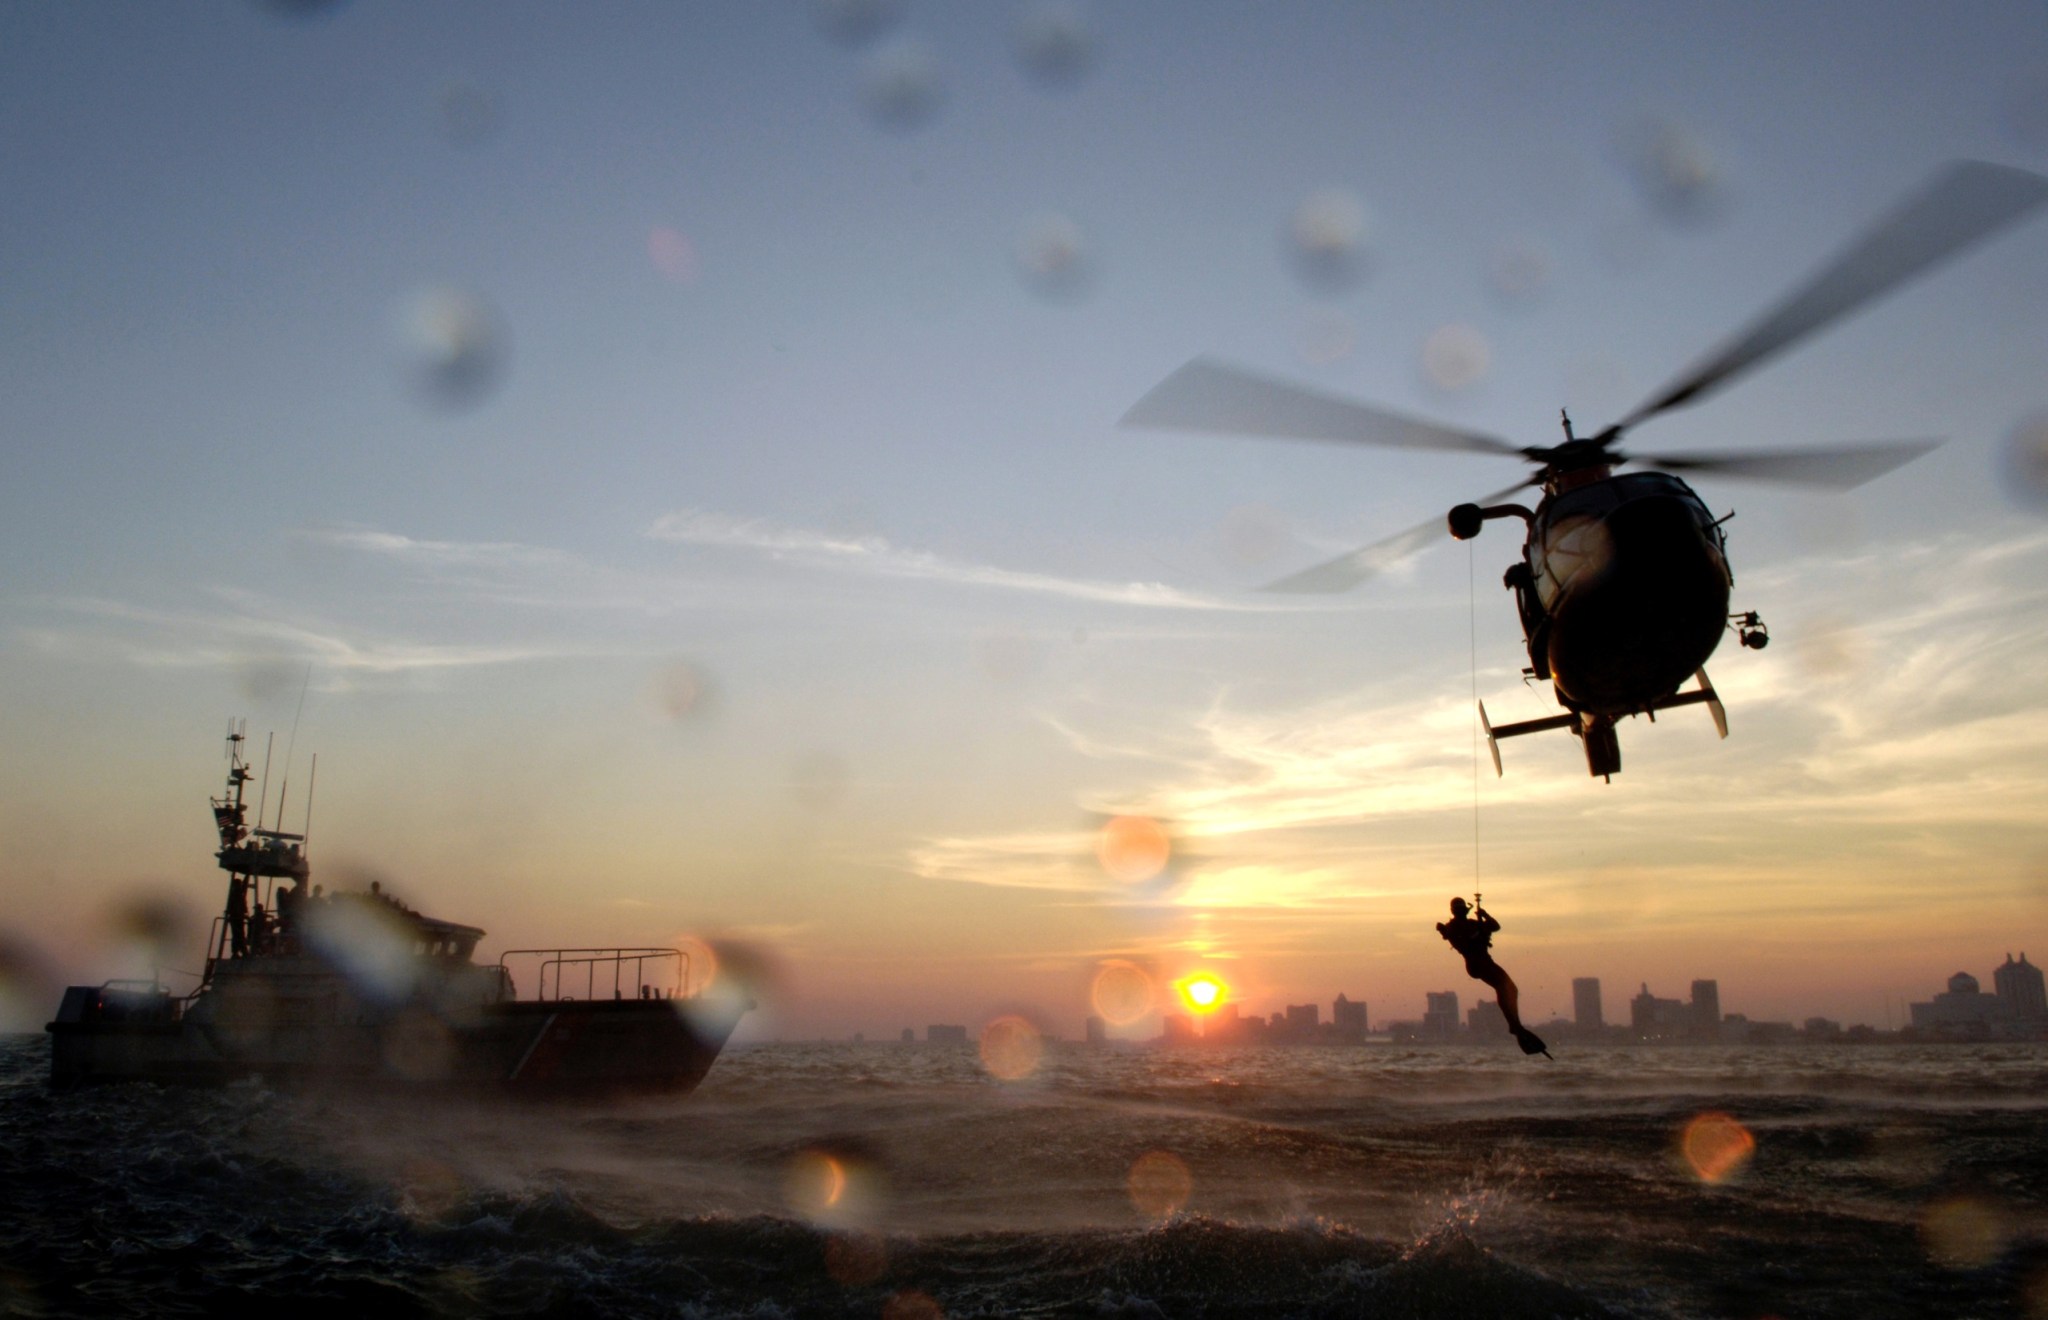 A helicopter flies low above the ocean during sunrise. A rescue diver is suspended from the helicopter, and nearby, a boat floats on the surface of the water. The skyline of a city can be seen in the far distance against a sky of blue and gold hues. Water droplets can be seen on the lens of the camera capturing the image.